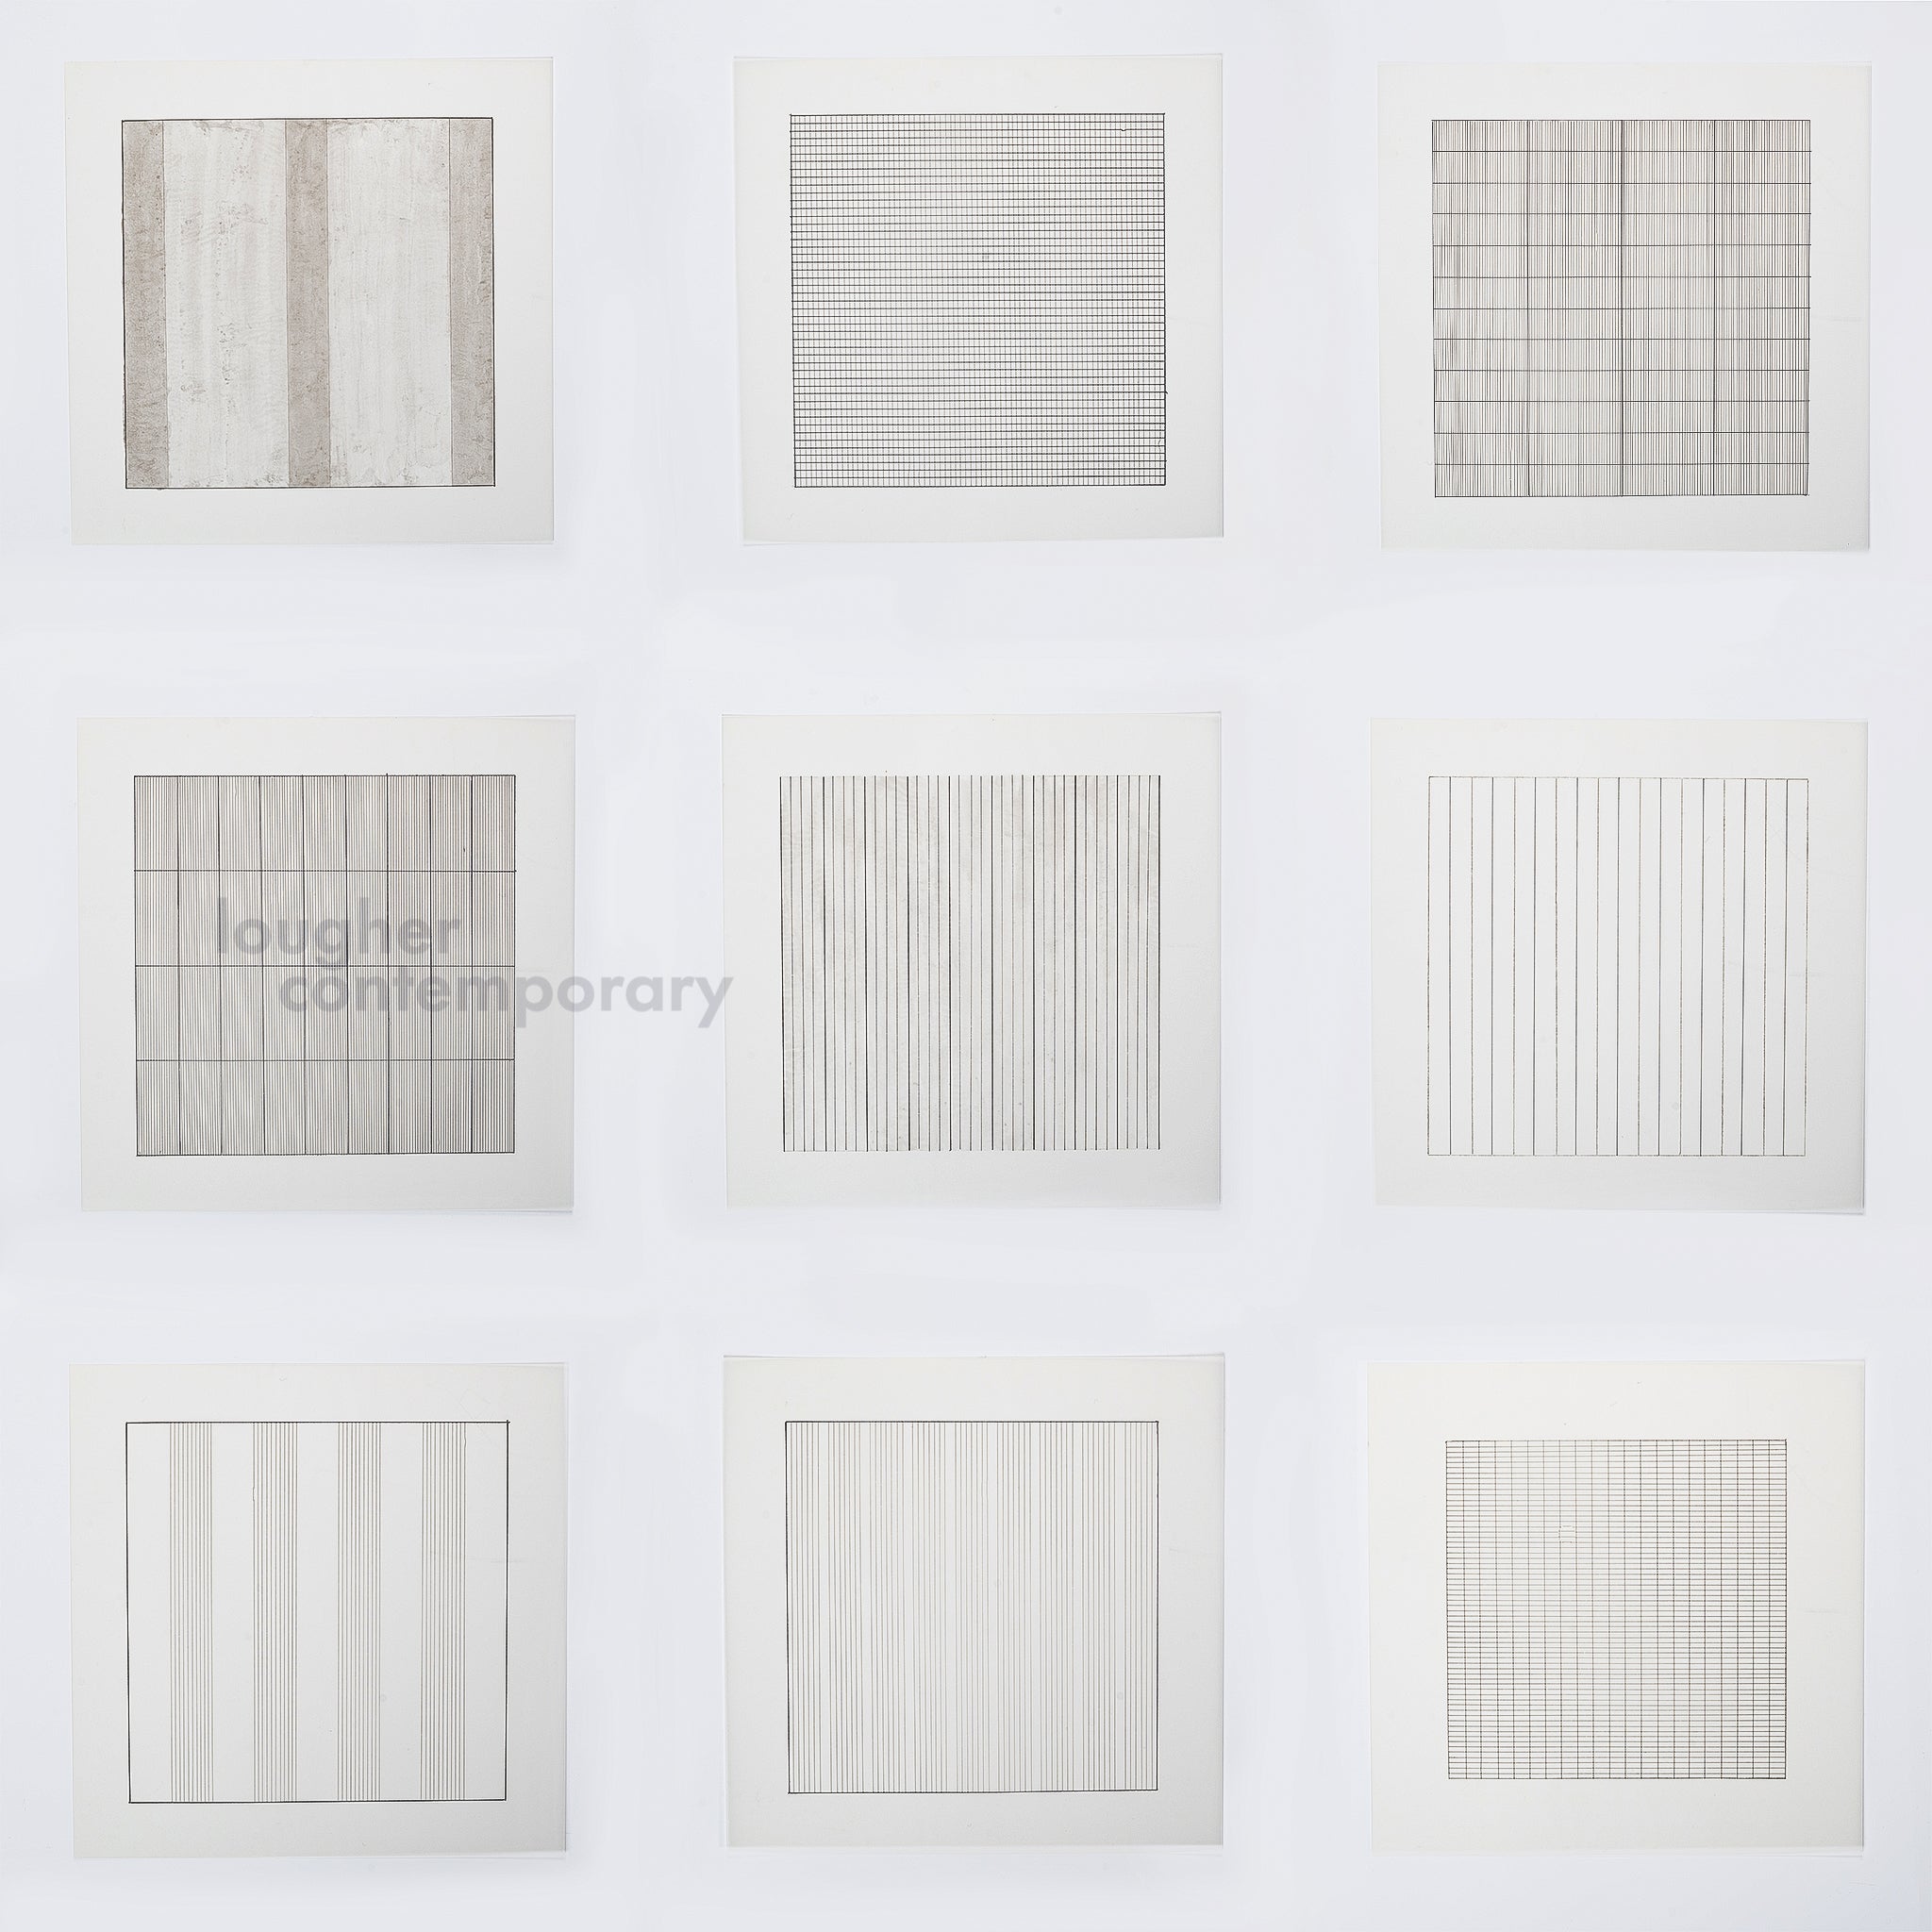 Agnes Martin, Untitled (from Paintings and Drawings: 1974-1990), 1993